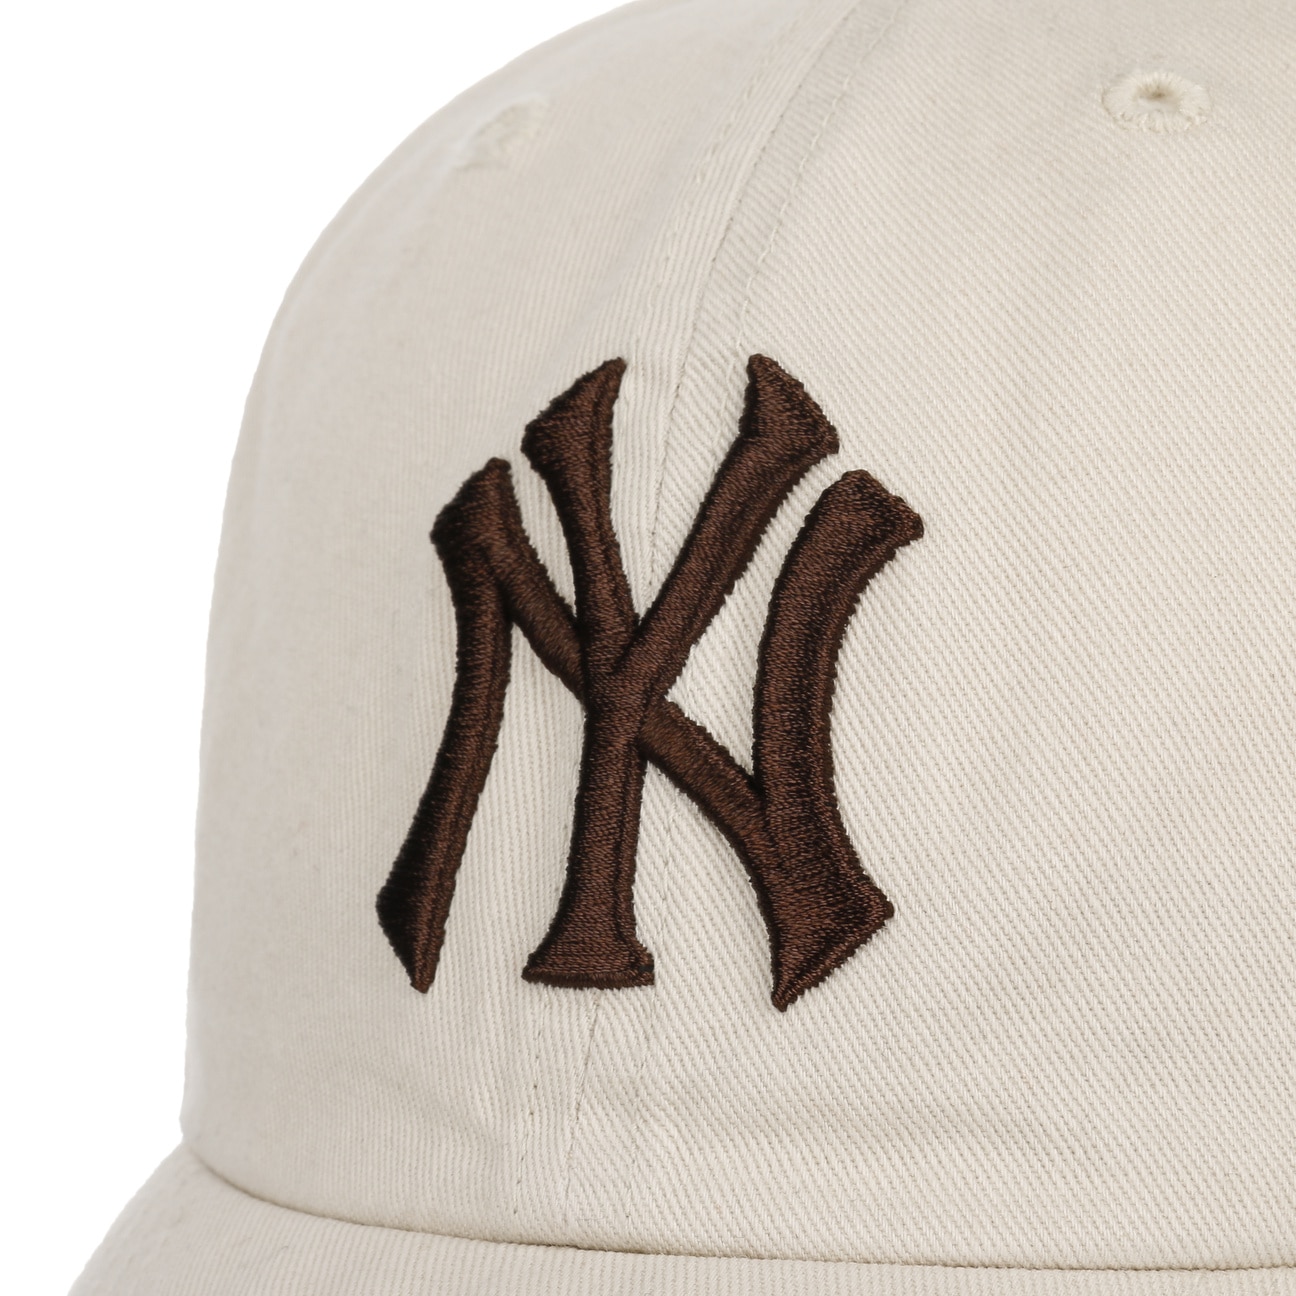 47 BRAND Clean Up Cap - NY Brown